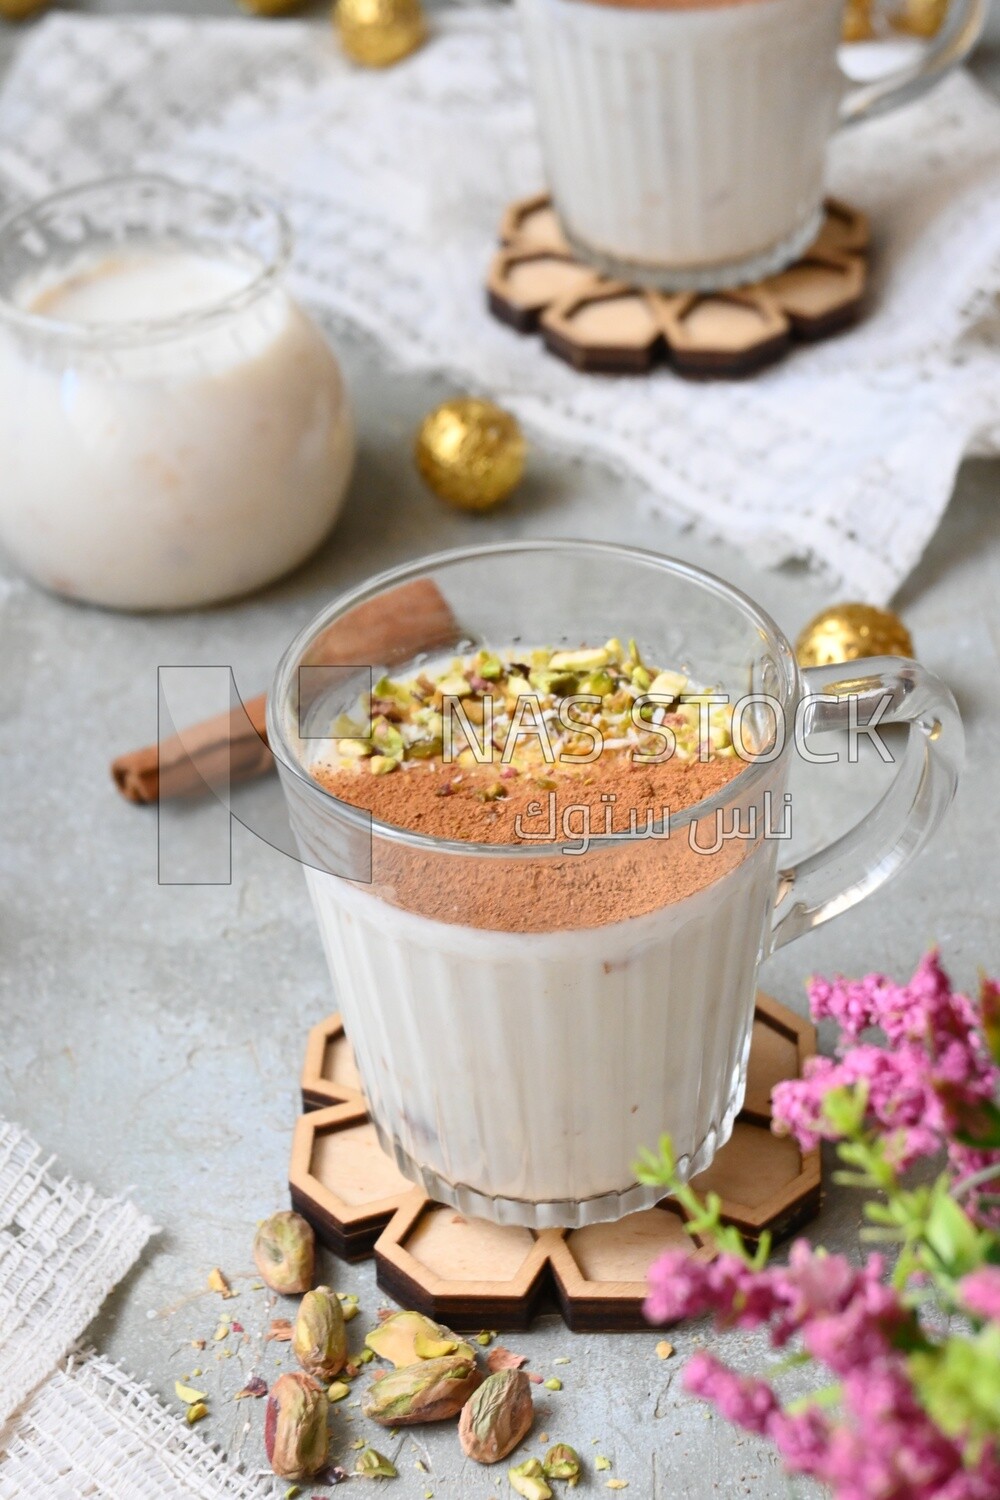 Cup of sahlab with cinnamon and nuts on it